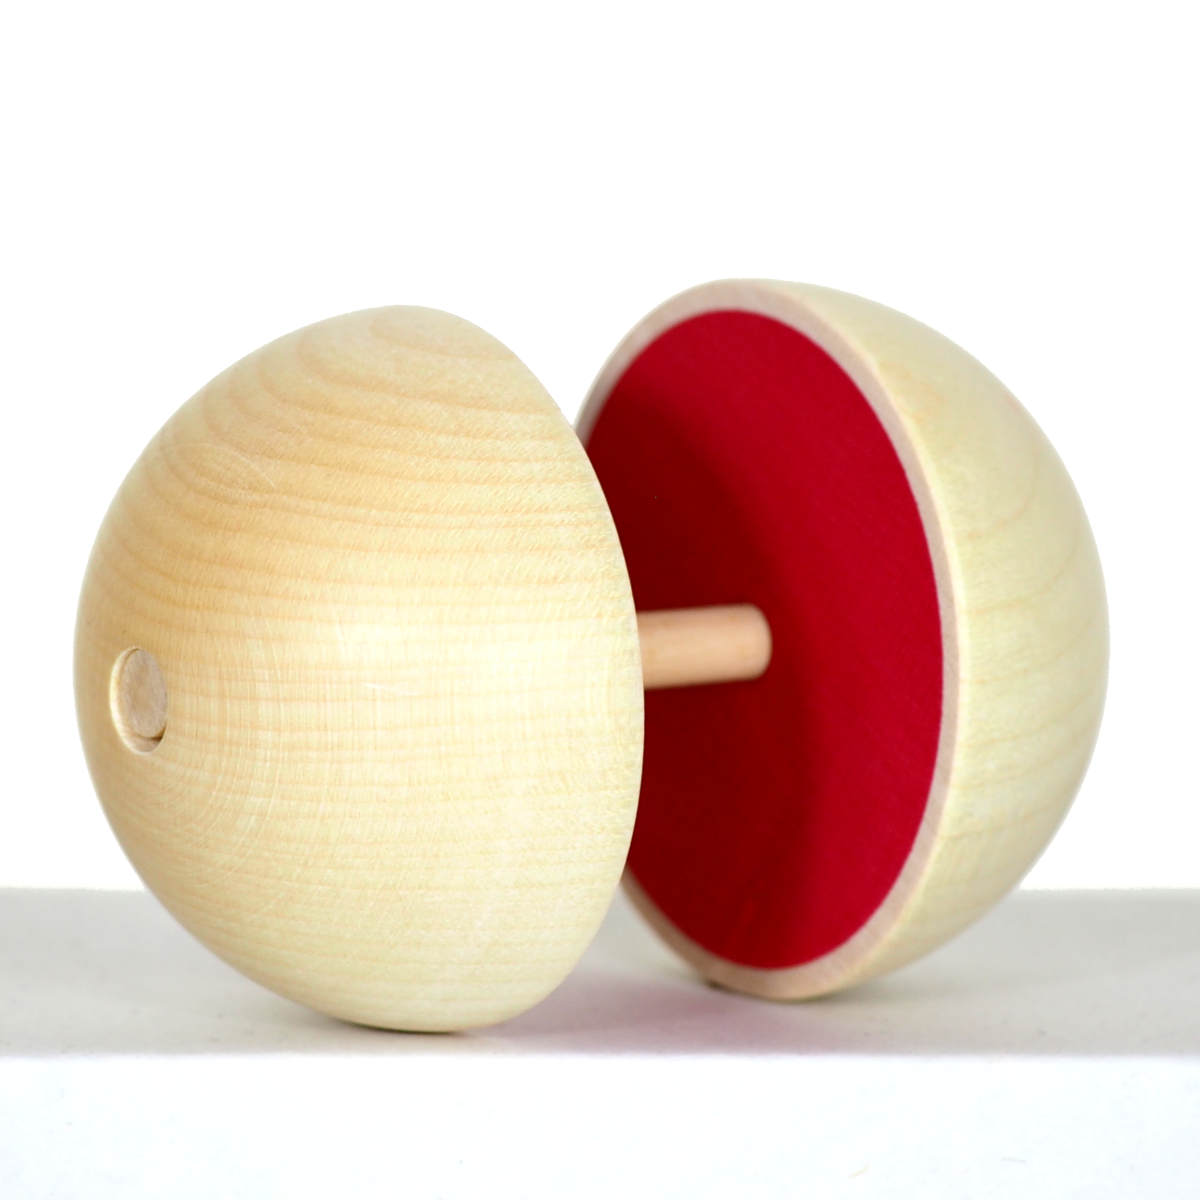 Wooden Spinning Top Naef Spin with Half Spheres